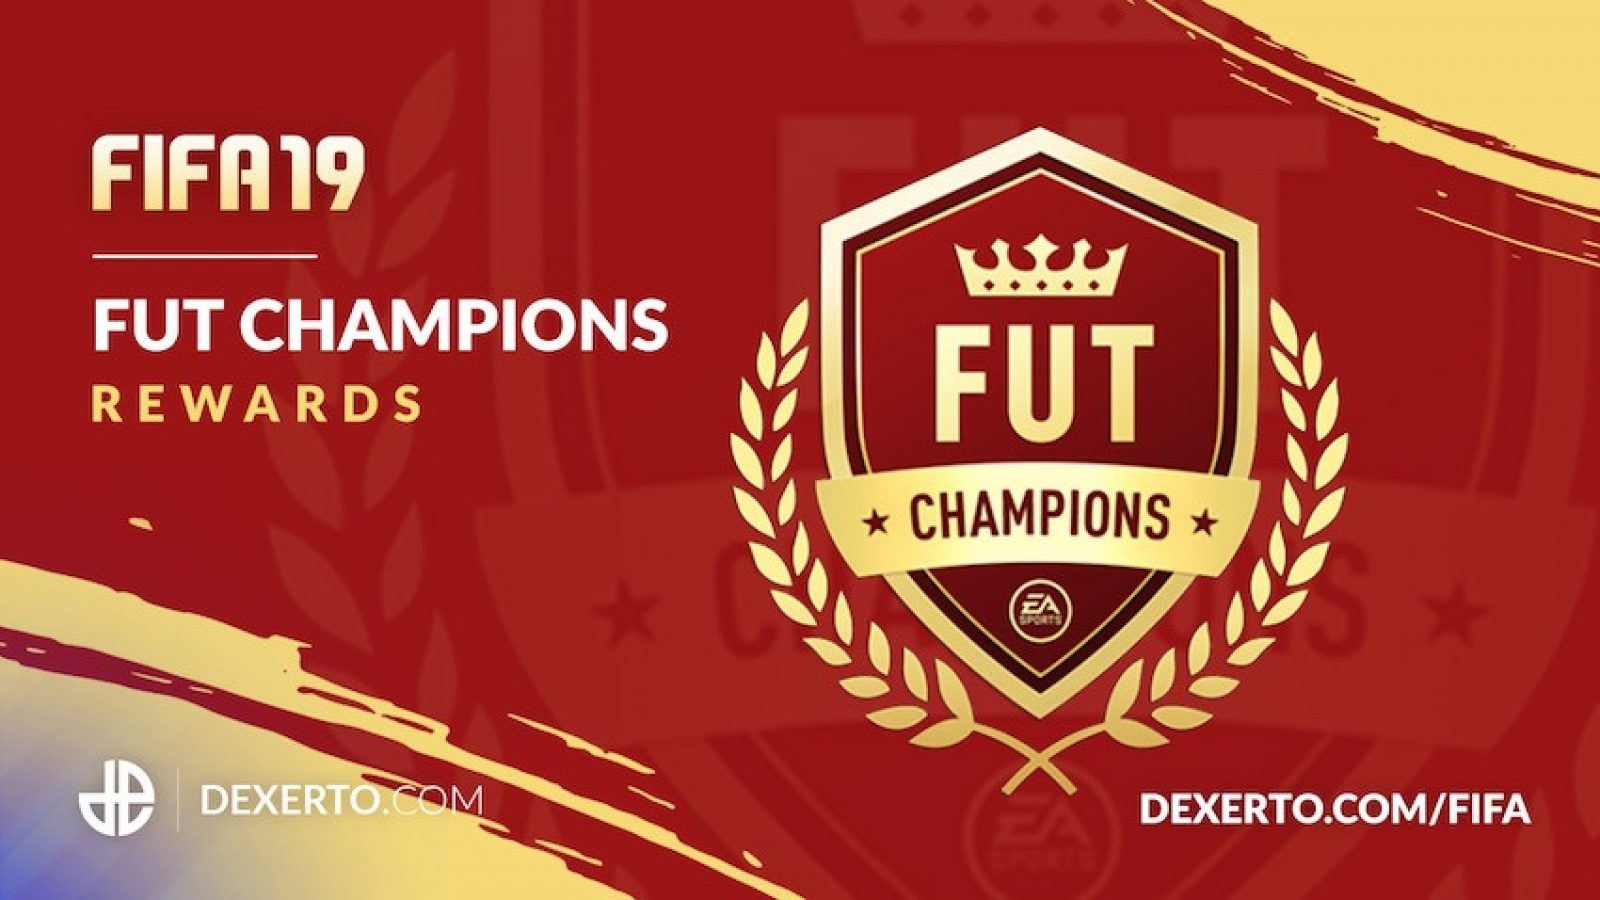 Major FIFA 22 FUT Champions change makes it easier than ever to